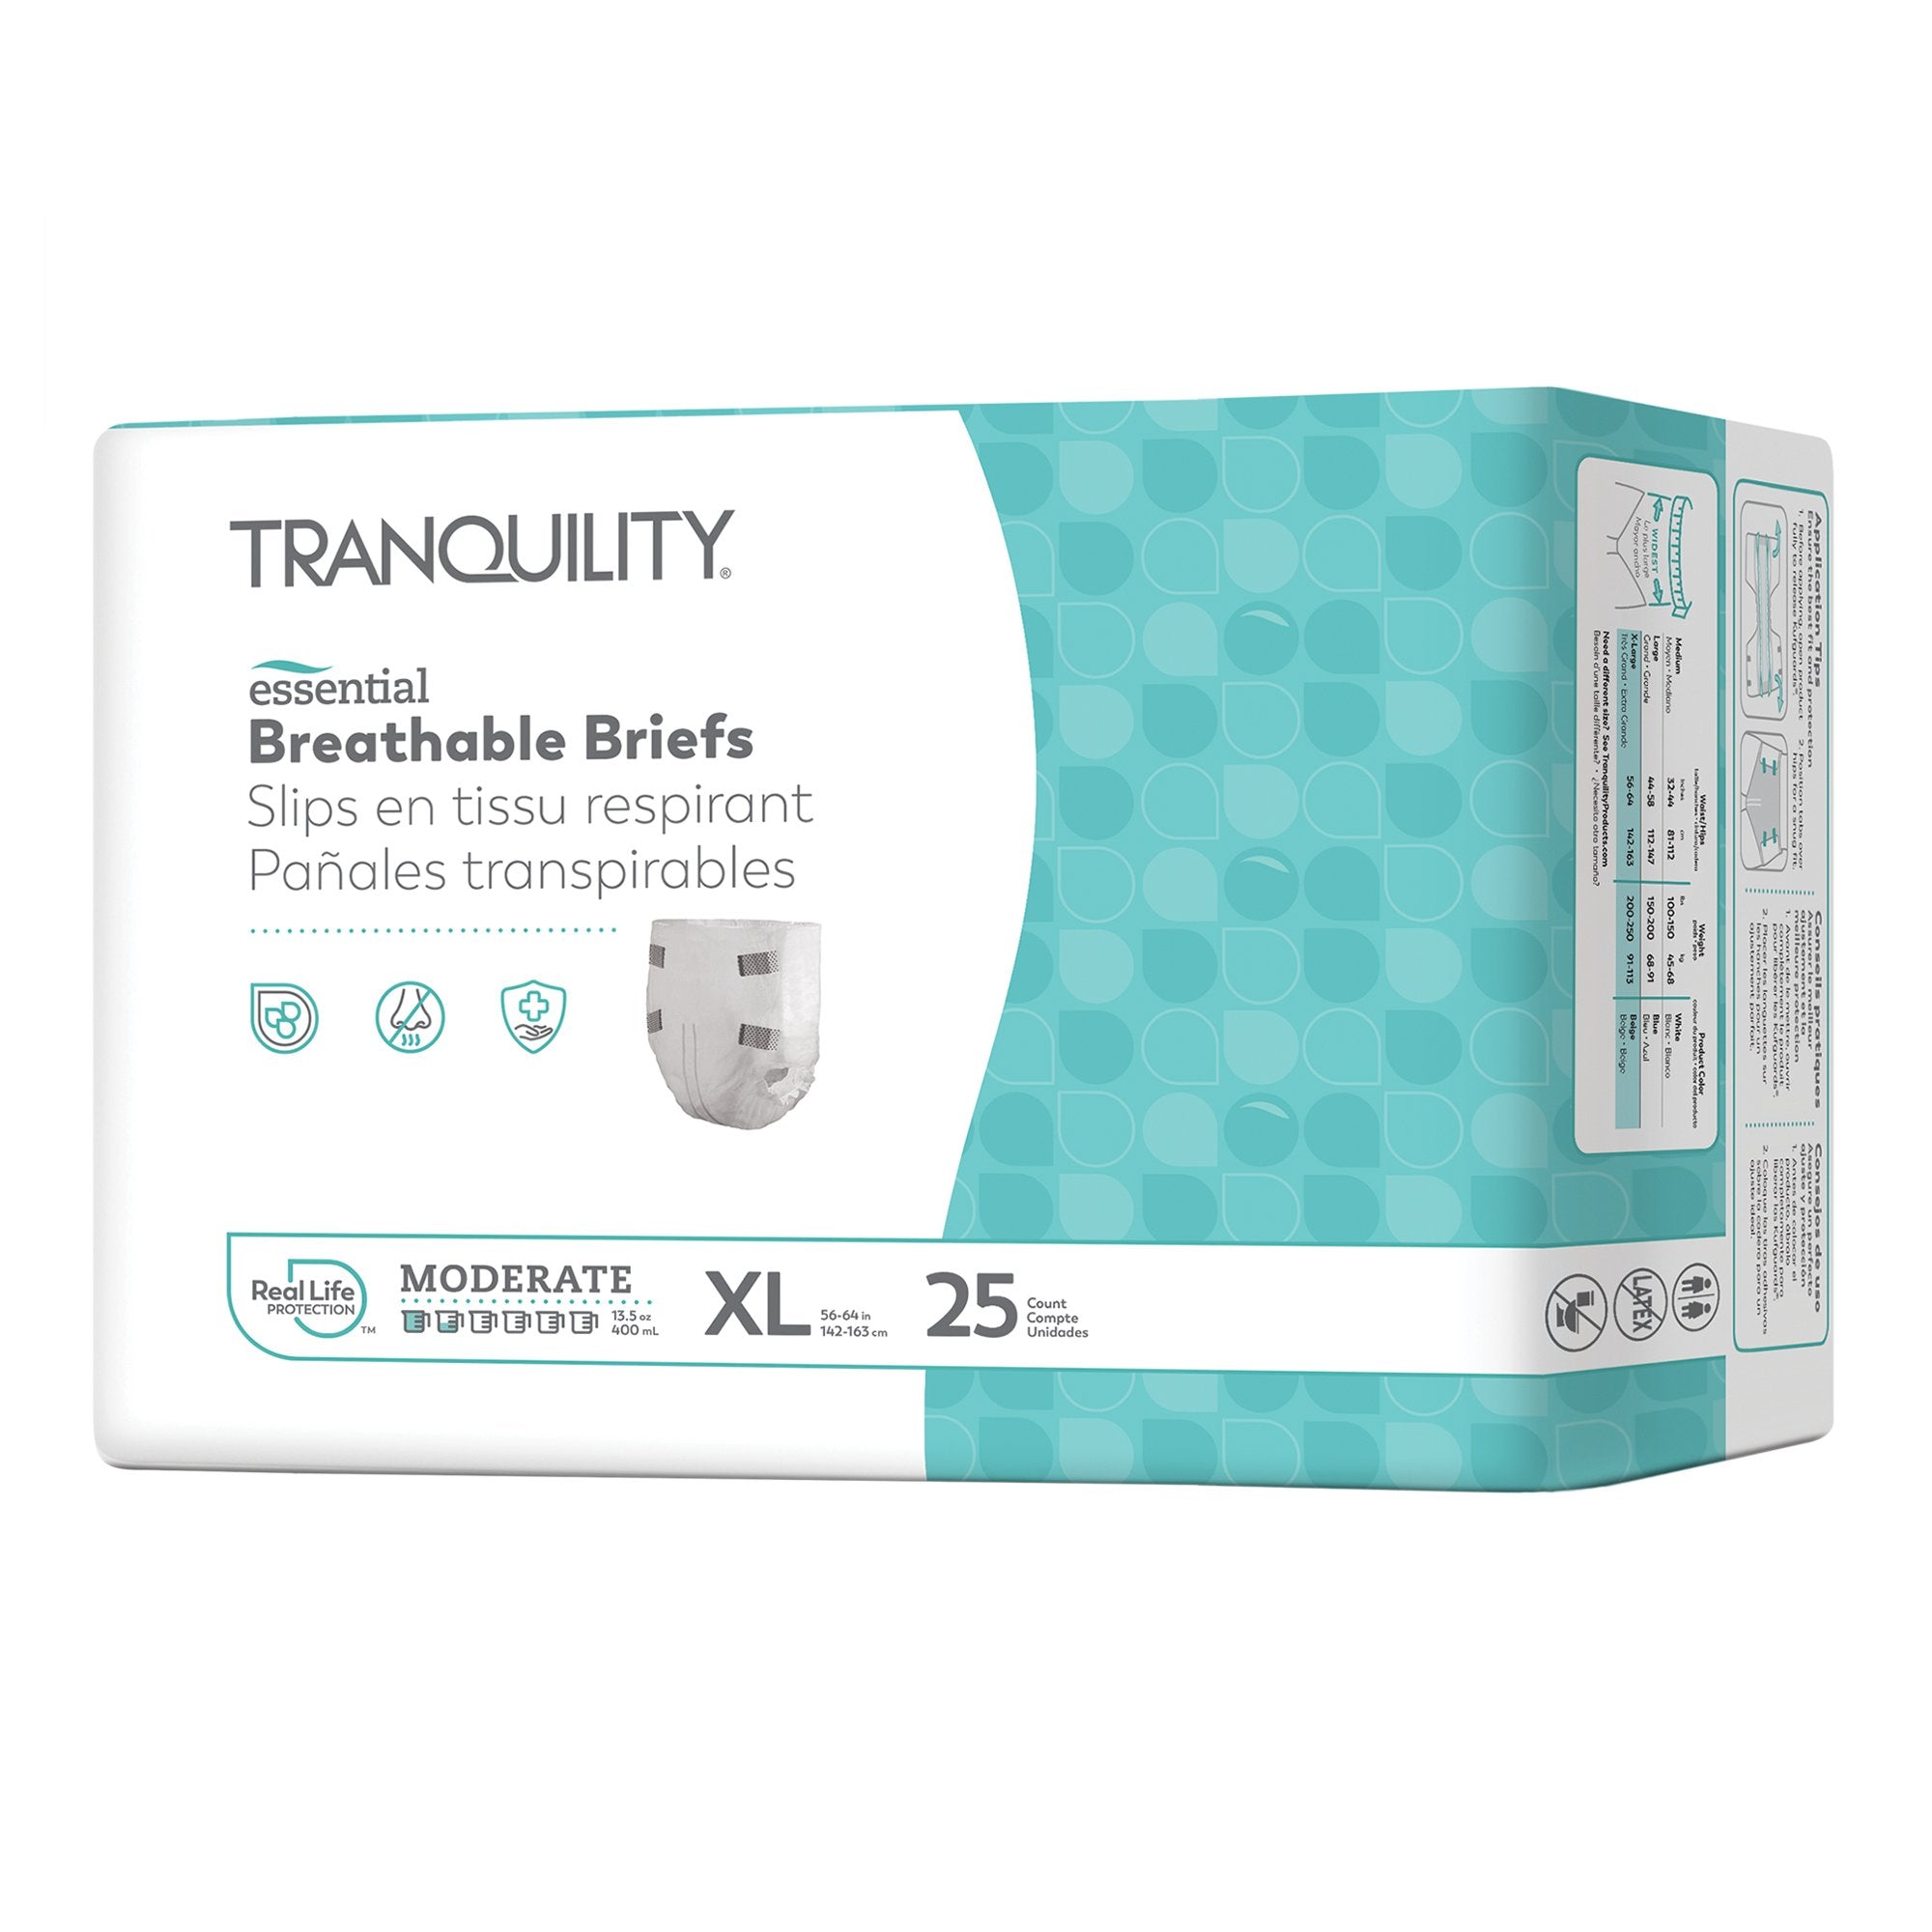 Unisex Adult Incontinence Brief Tranquility® Essential X-Large Disposable Moderate Absorbency